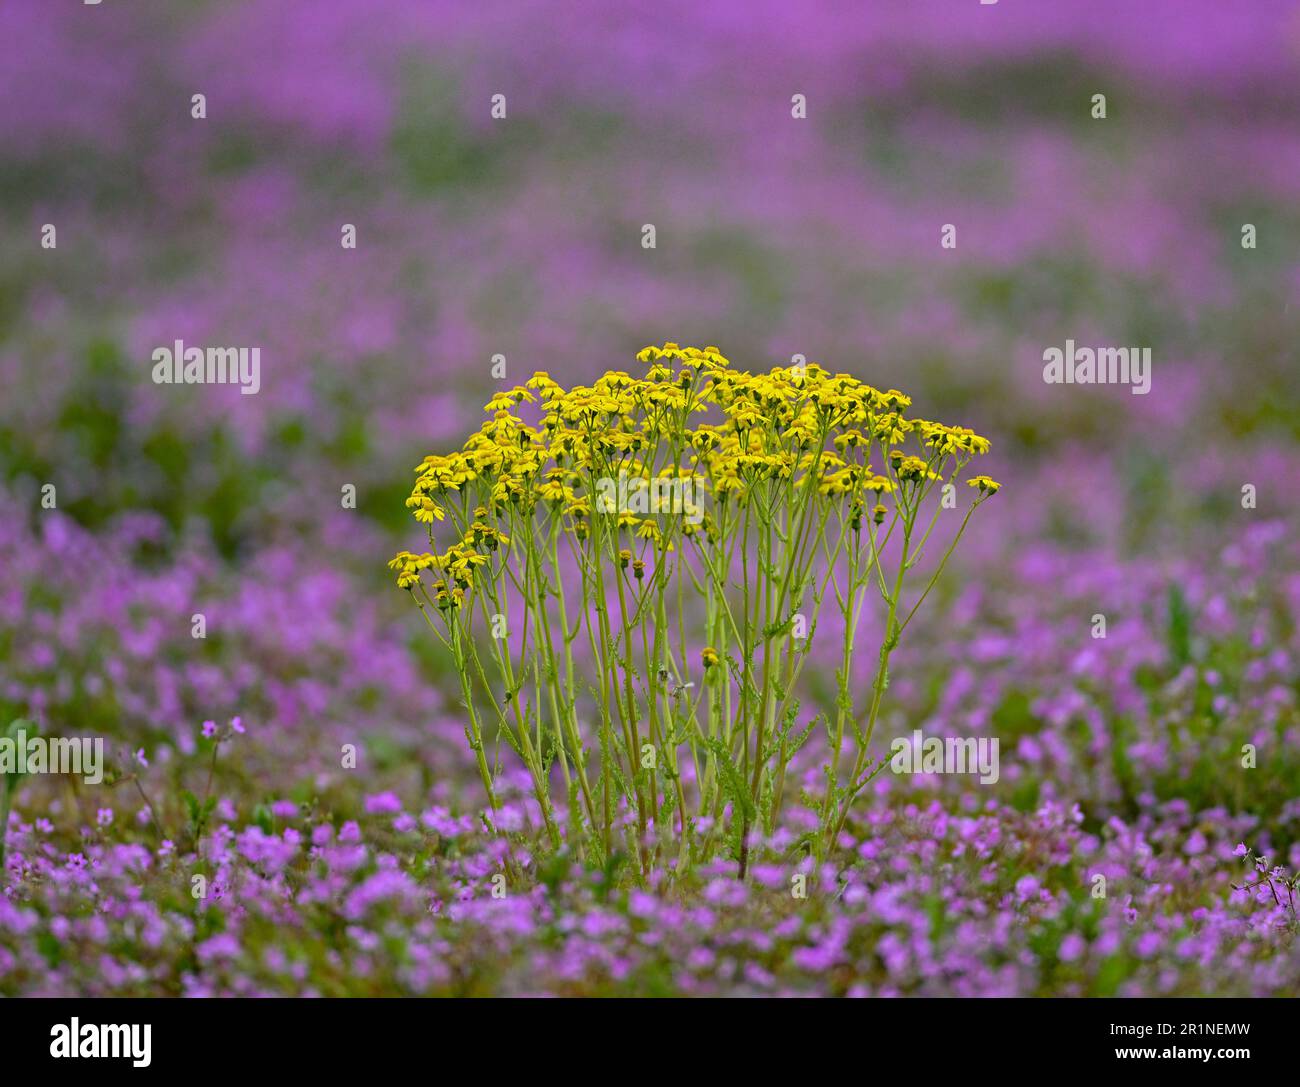 15 May 2023, Brandenburg, Jacobsdorf: A colorful carpet on a fallow field of purple flowers is formed by the common heron's beak (Erodium cicutarium) together with the yellow flowers of the golden ragwort (Senecio aureus). The weather outlook for Berlin and Brandenburg this week is rather gloomy. The reason for the changeable weather over the next few days is the influence of a low pressure system moving from Poland towards Scandinavia, according to the German Weather Service (DWD). Monday begins cloudy and partly slightly rainy. From noon, there will be widespread showers and thunderstorms, p Stock Photo